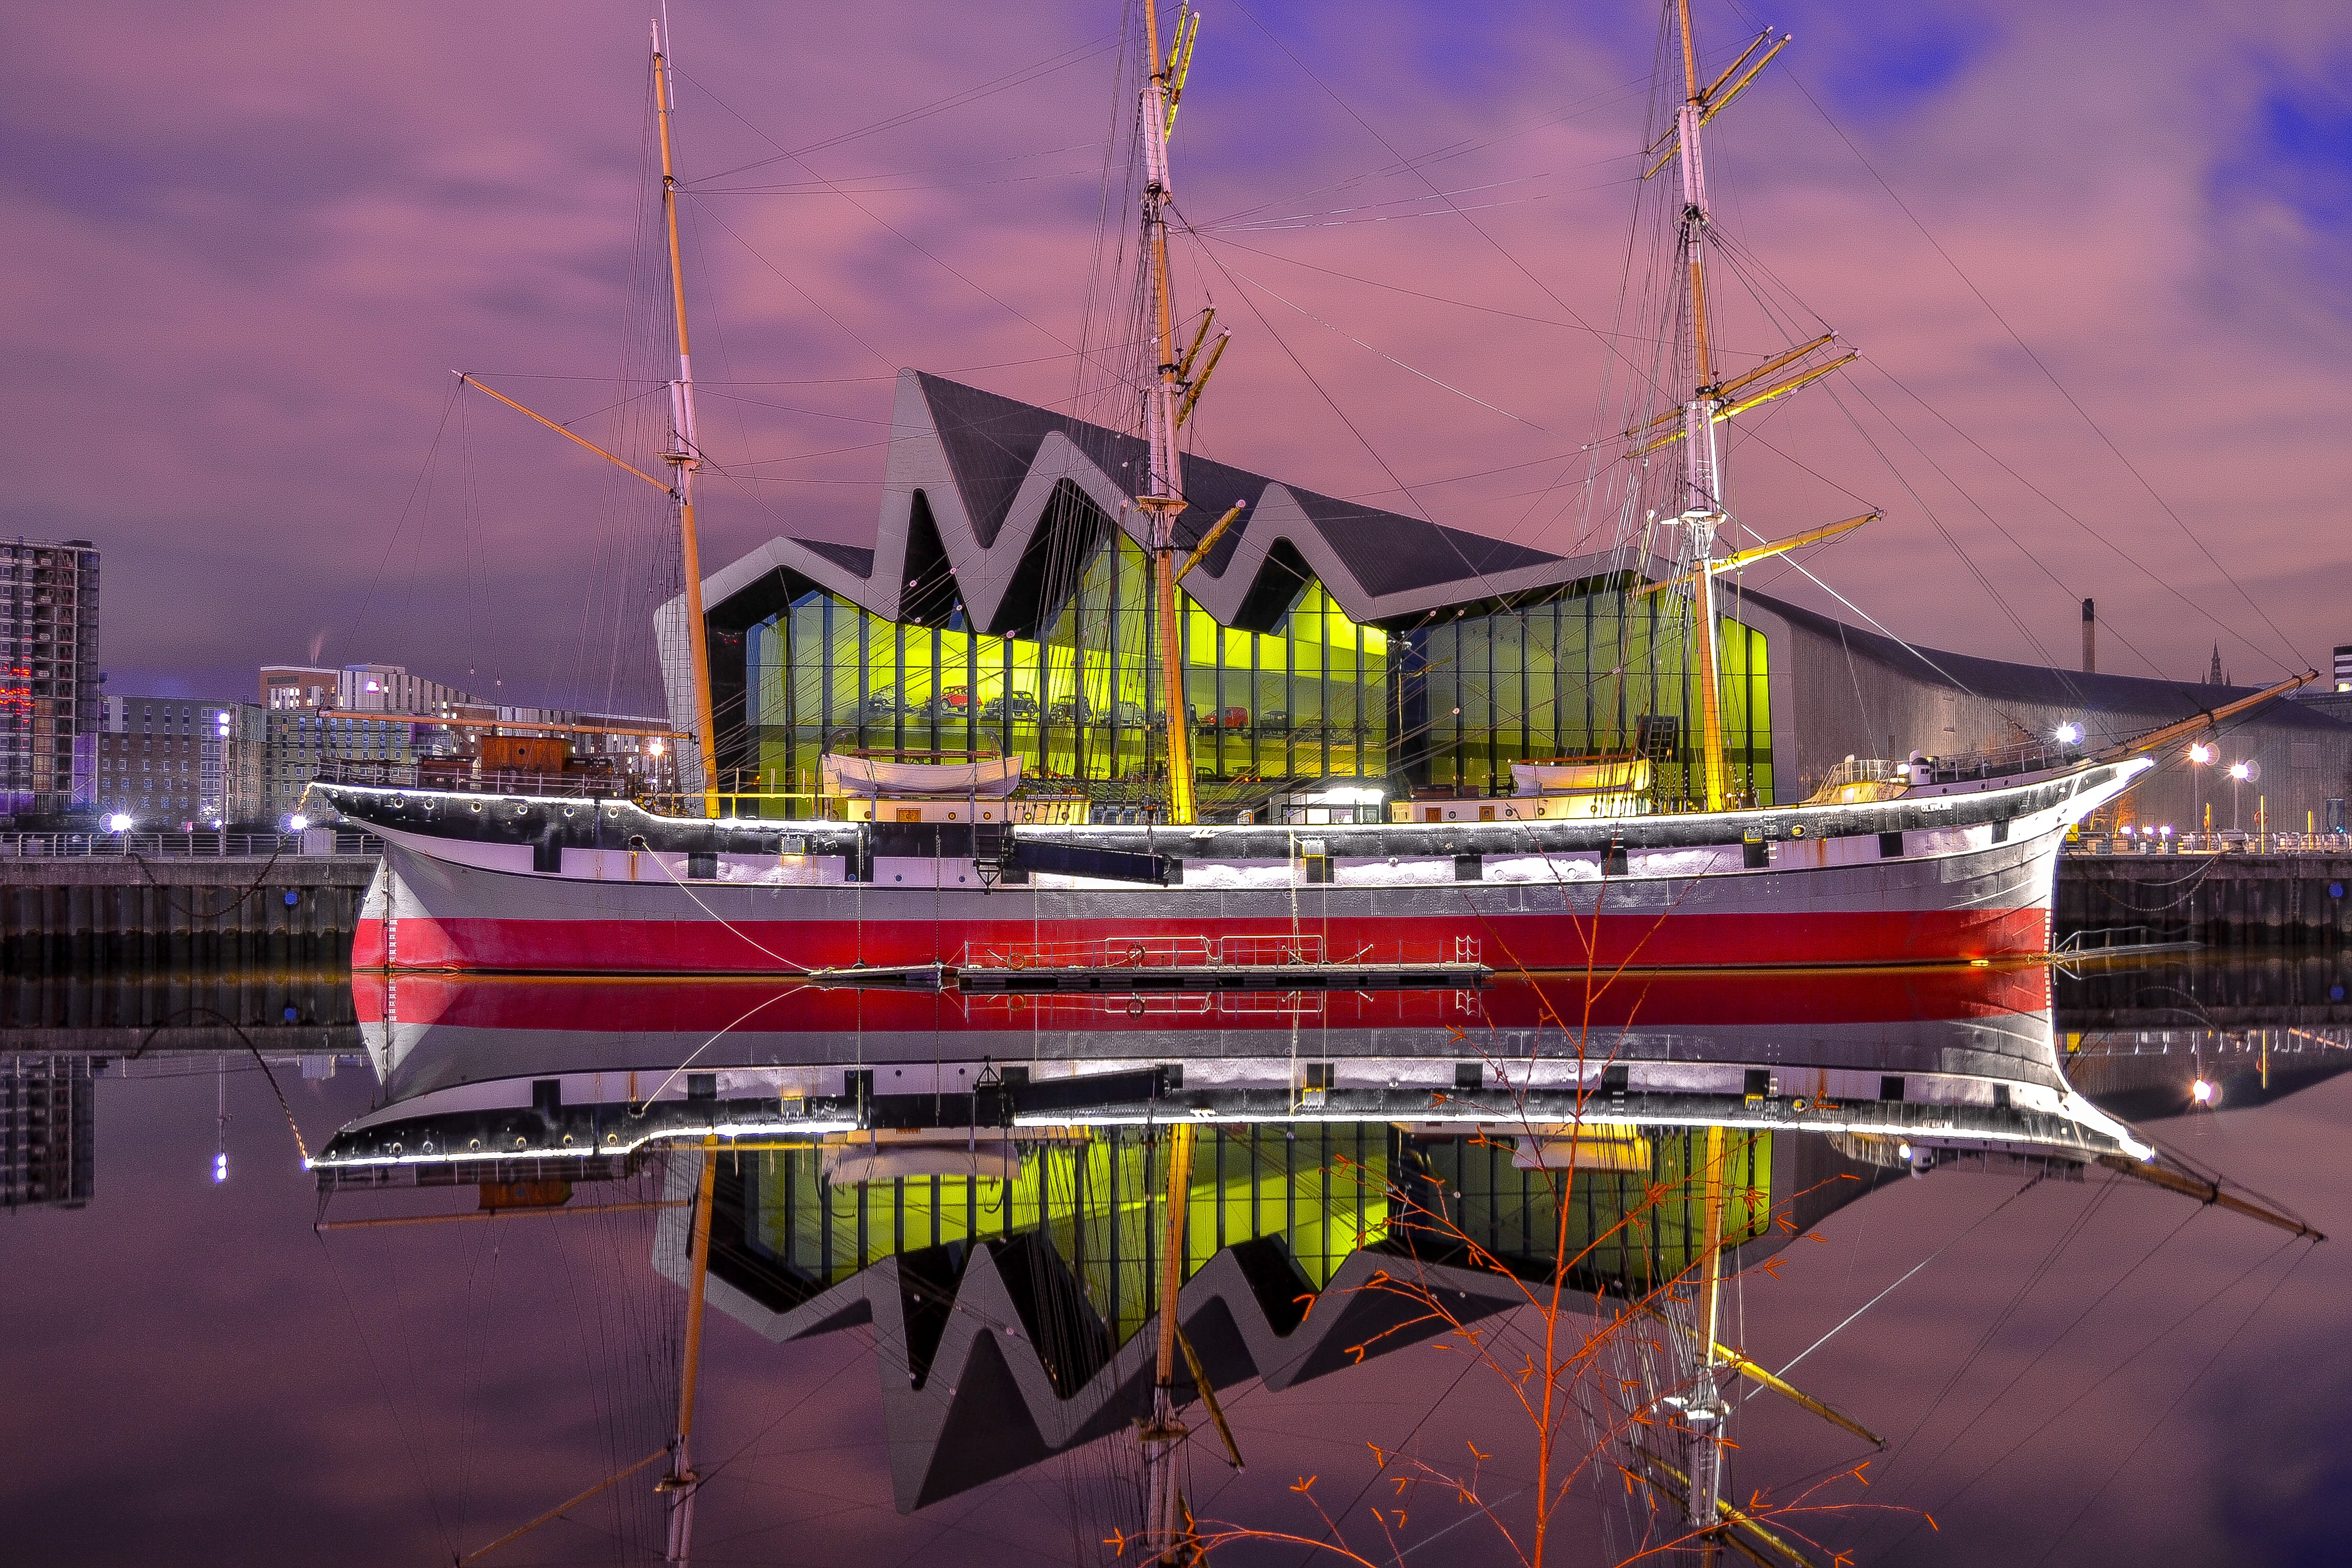 Front cover 2020 Calendar image - Riverside Museum, Glasgow and Tall Ship Glenlee by Daniel Jones